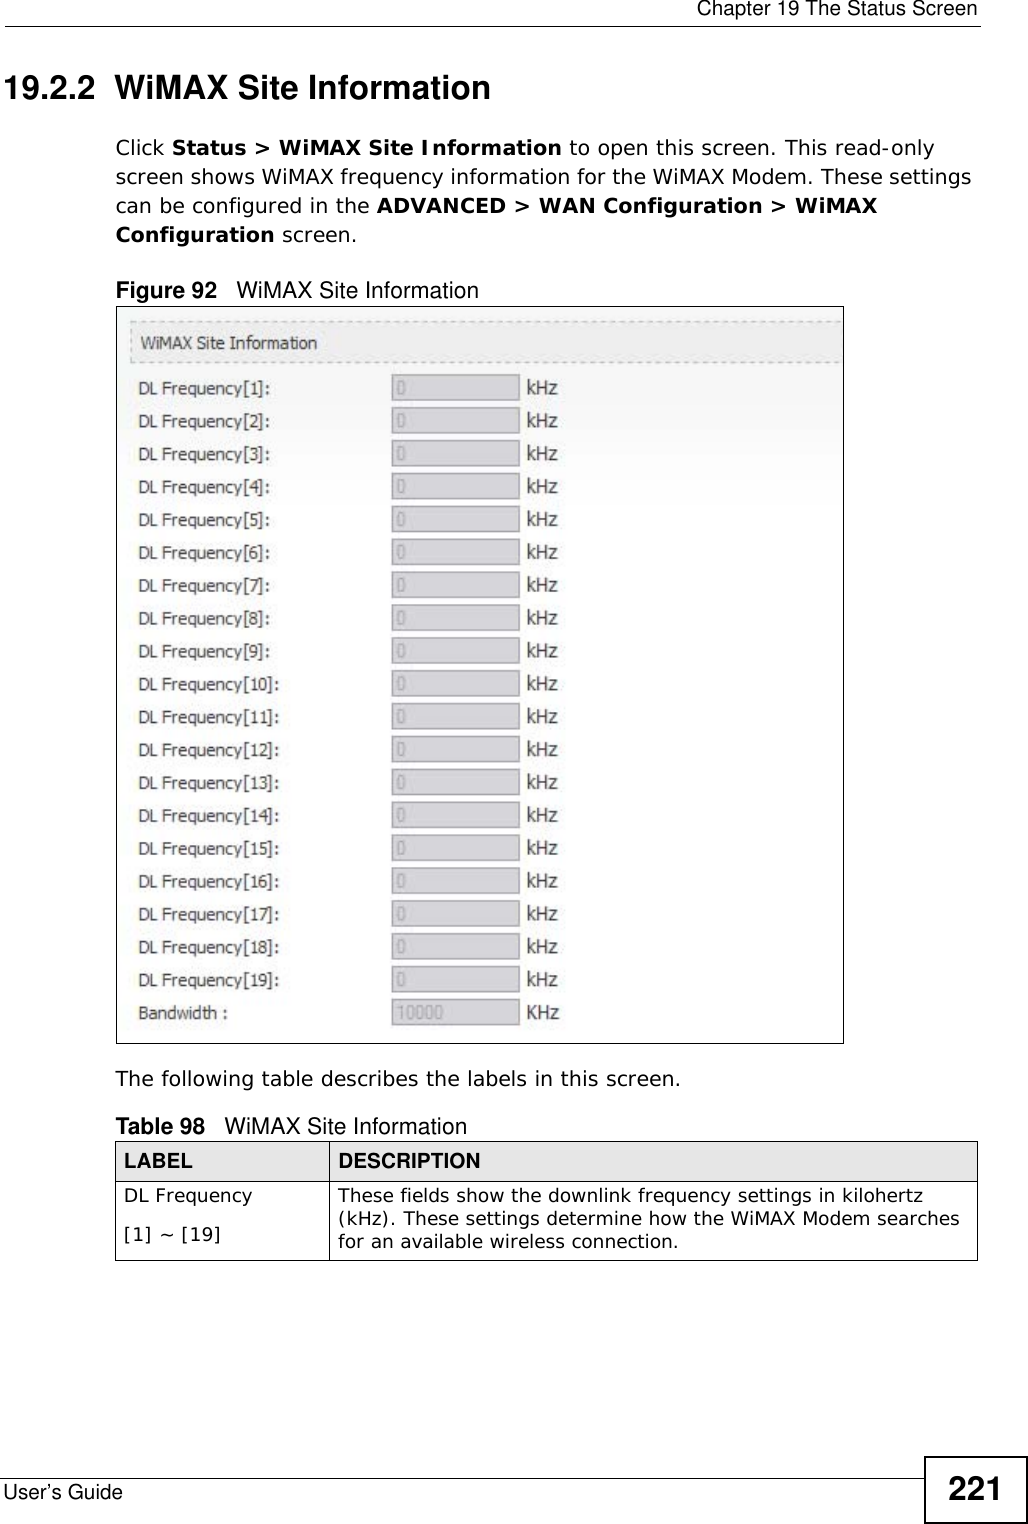  Chapter 19 The Status ScreenUser’s Guide 22119.2.2  WiMAX Site InformationClick Status &gt; WiMAX Site Information to open this screen. This read-only screen shows WiMAX frequency information for the WiMAX Modem. These settings can be configured in the ADVANCED &gt; WAN Configuration &gt; WiMAX Configuration screen.Figure 92   WiMAX Site Information The following table describes the labels in this screen. Table 98   WiMAX Site InformationLABEL DESCRIPTIONDL Frequency[1] ~ [19]These fields show the downlink frequency settings in kilohertz (kHz). These settings determine how the WiMAX Modem searches for an available wireless connection.